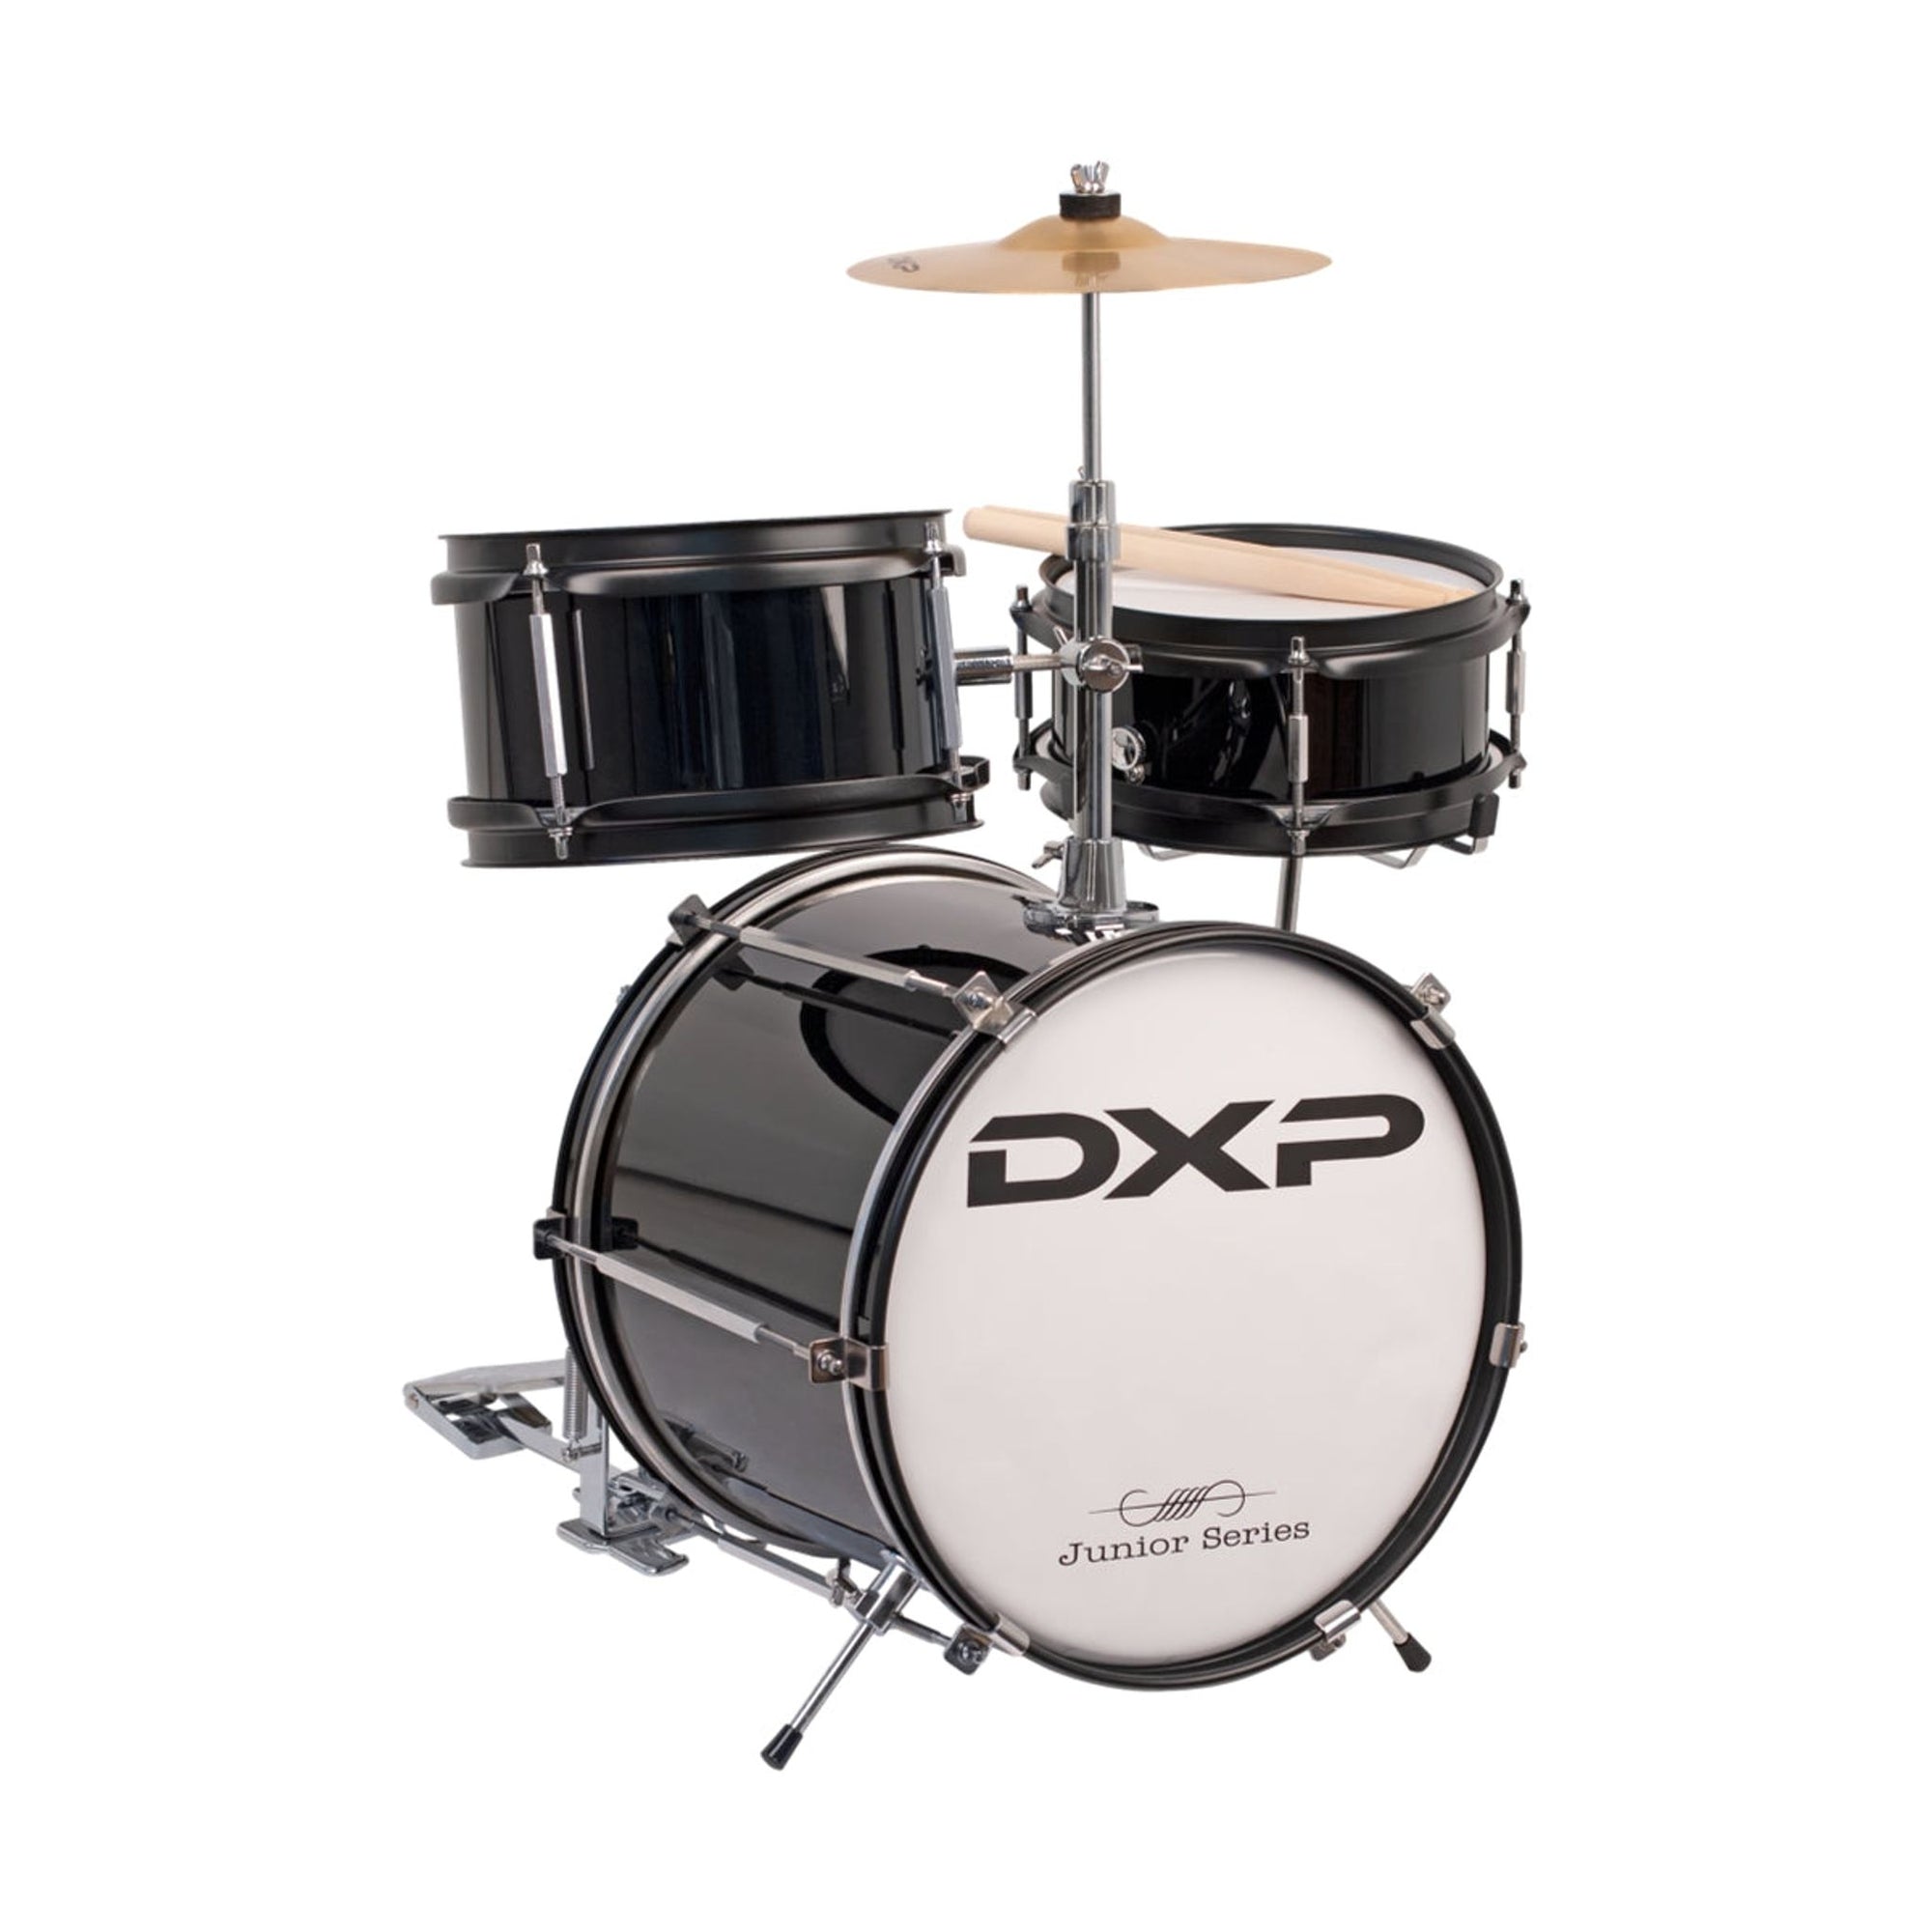 DXP Junior Drum Kit features a 12"x10" Bass Drum, 8"x4 1/2" Tom Tom 8" x 3 1/2" Snare drum on stand, 8" Cymbal Bass and drum pedal. It is perfect for the youngest of drummers. 